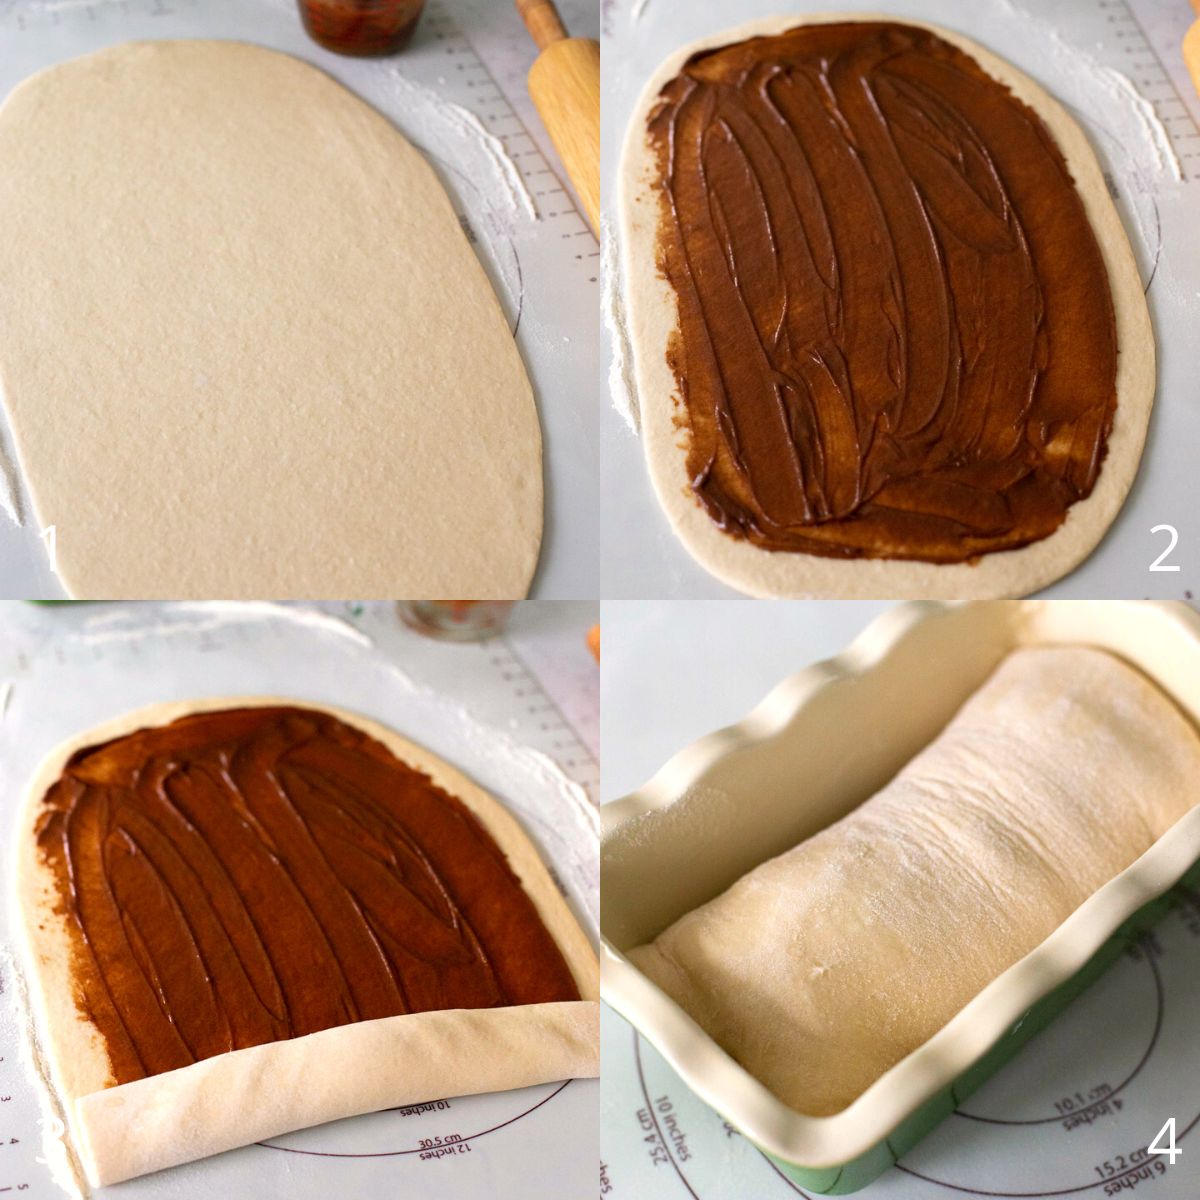 The step by step photos show how to roll up the cinnamon swirl dough.